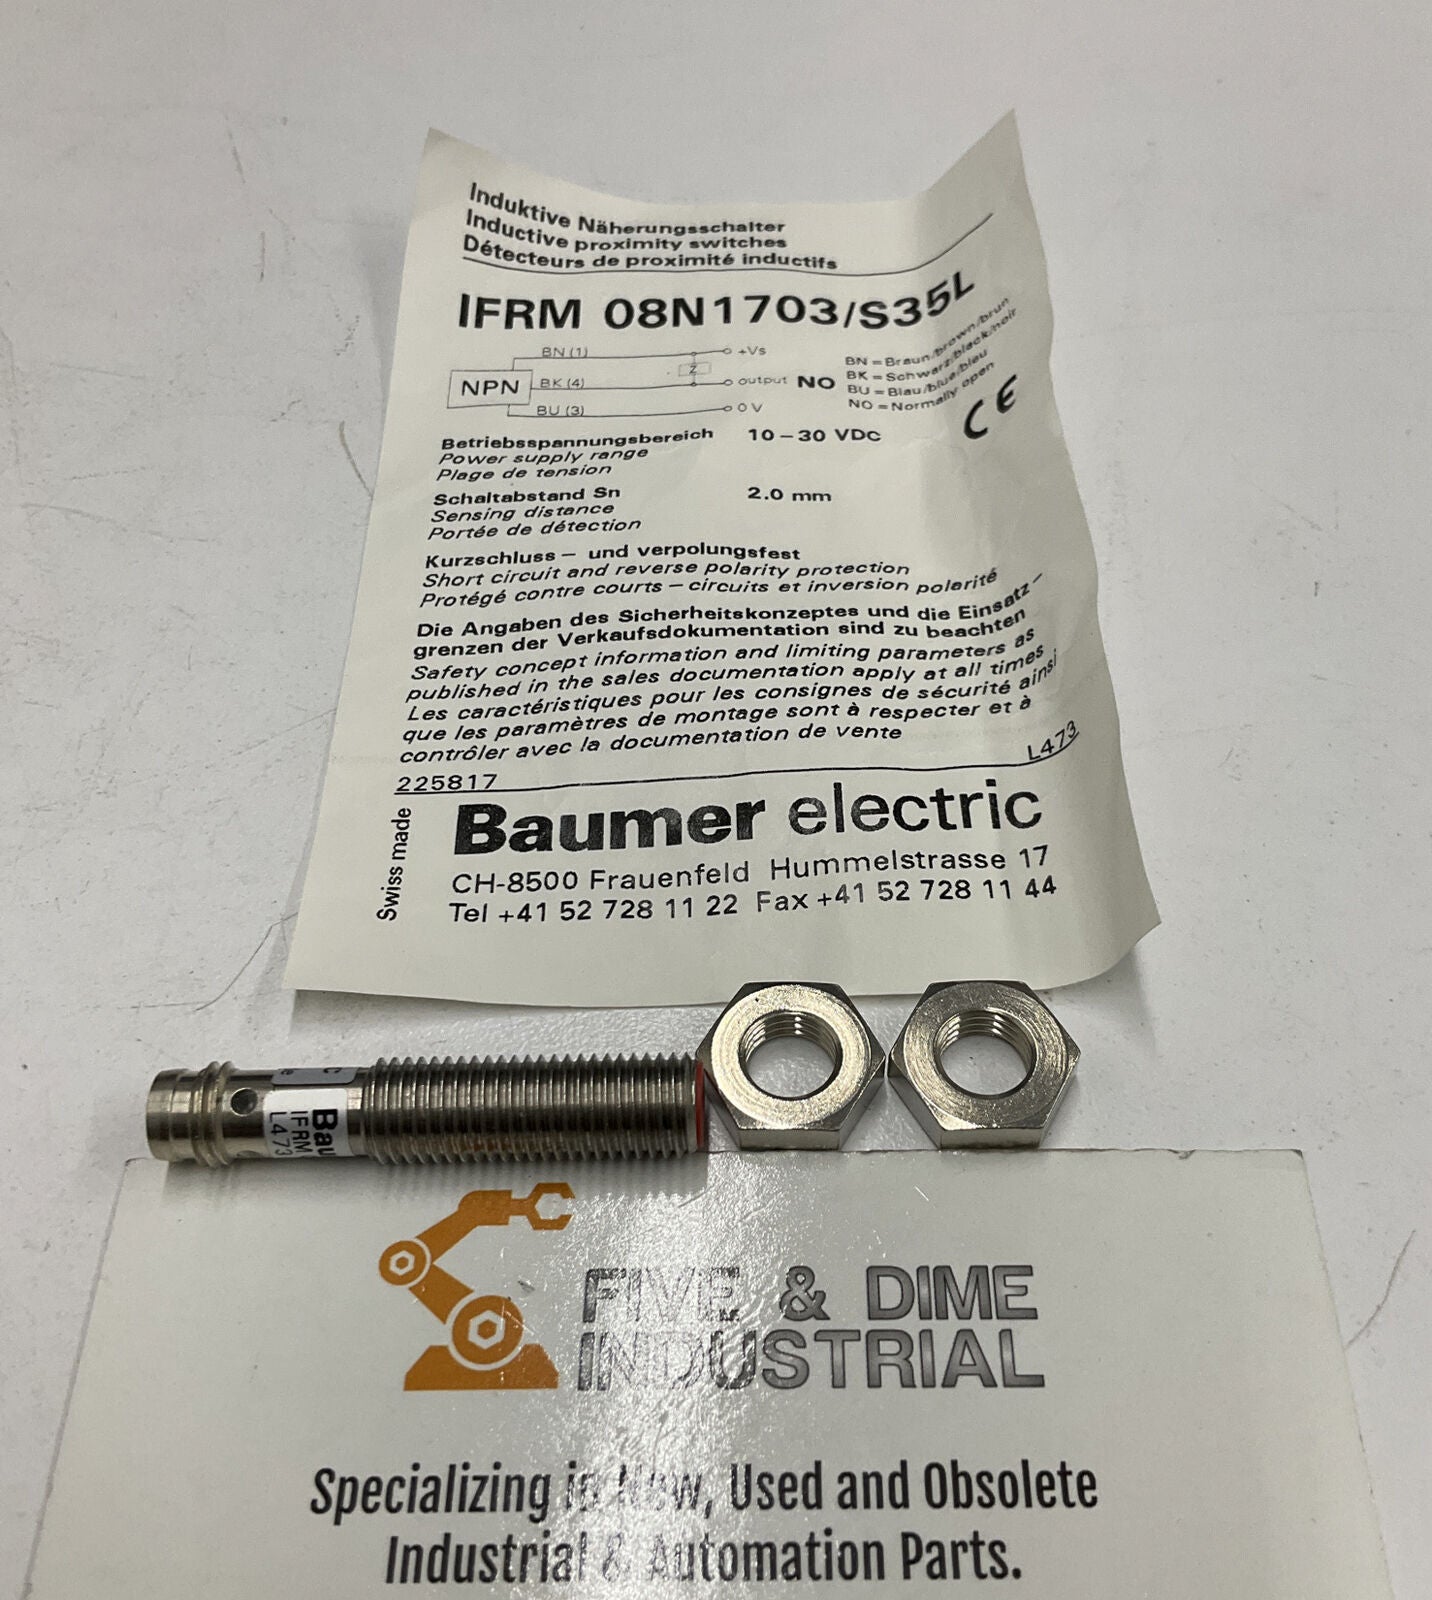 Baumer Electric IFRM-08N1703 / S35L Inductive Proximity Switch / Sensor (BL192) - 0